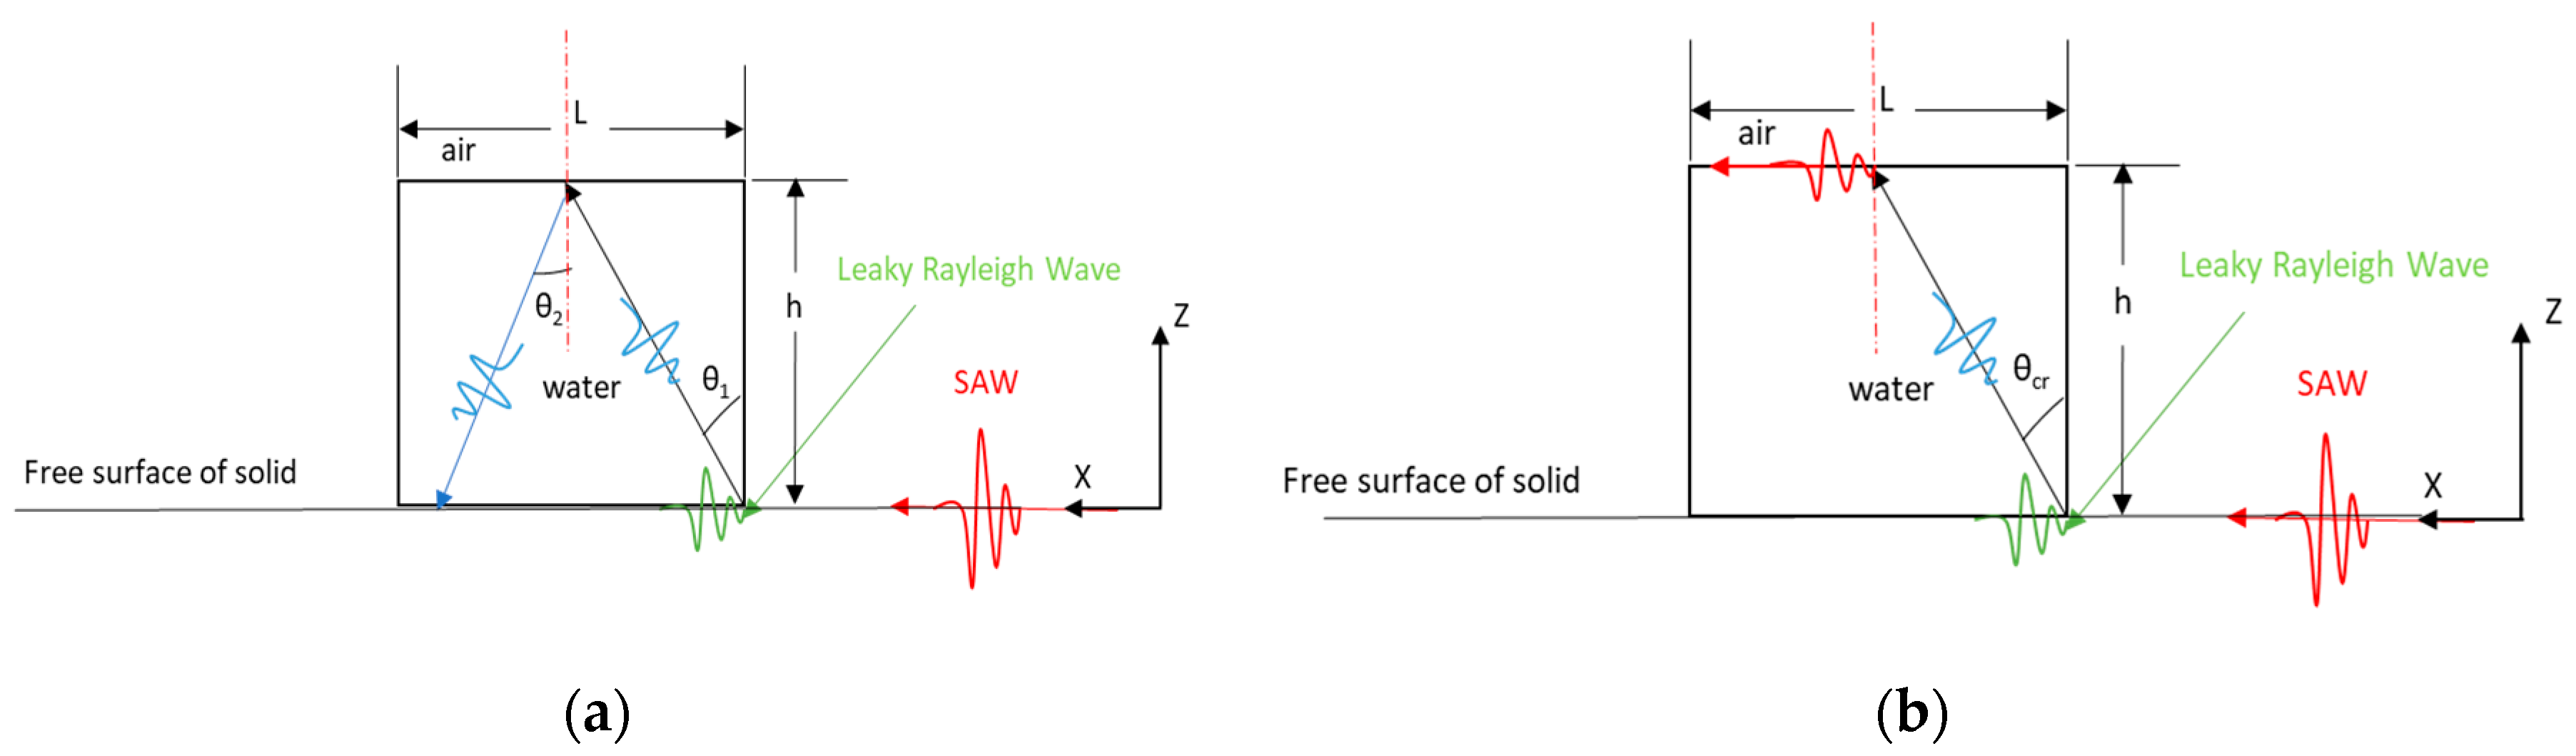 acoustic fields and waves in solids book pdf